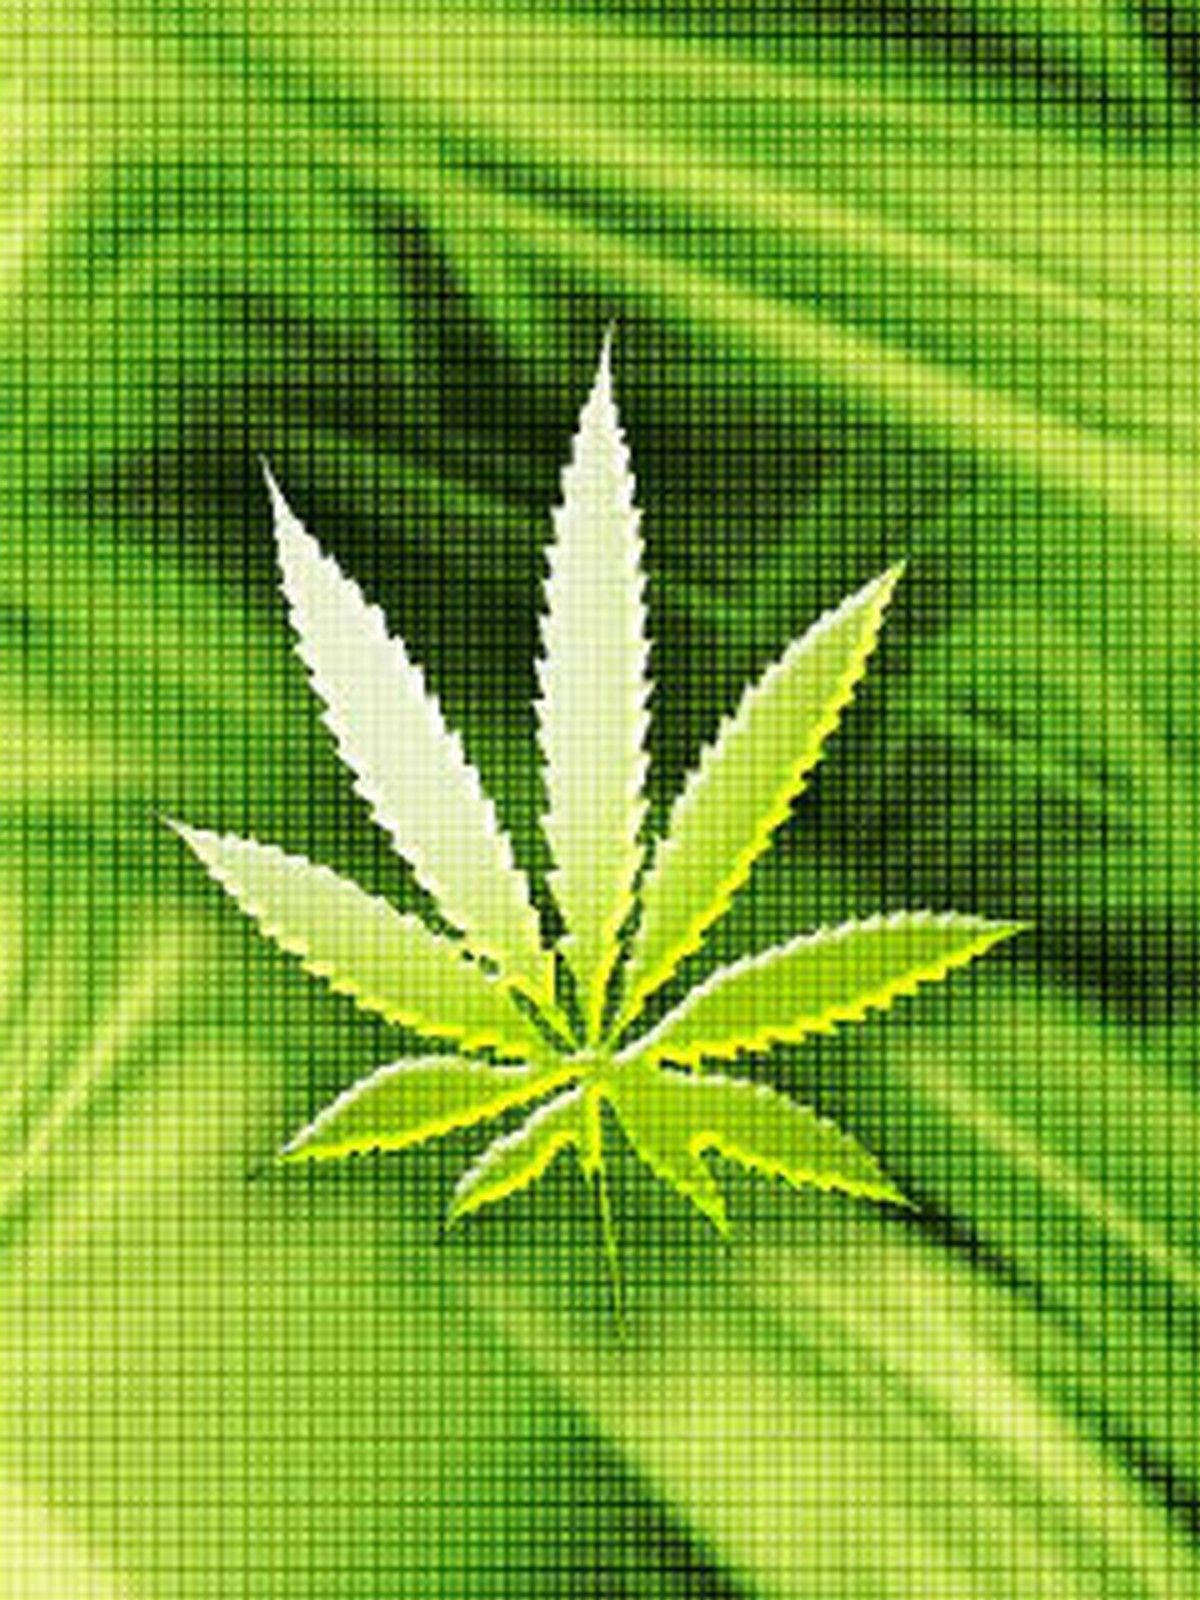 Weed Leaf In Abstract Square Pattern Wallpaper